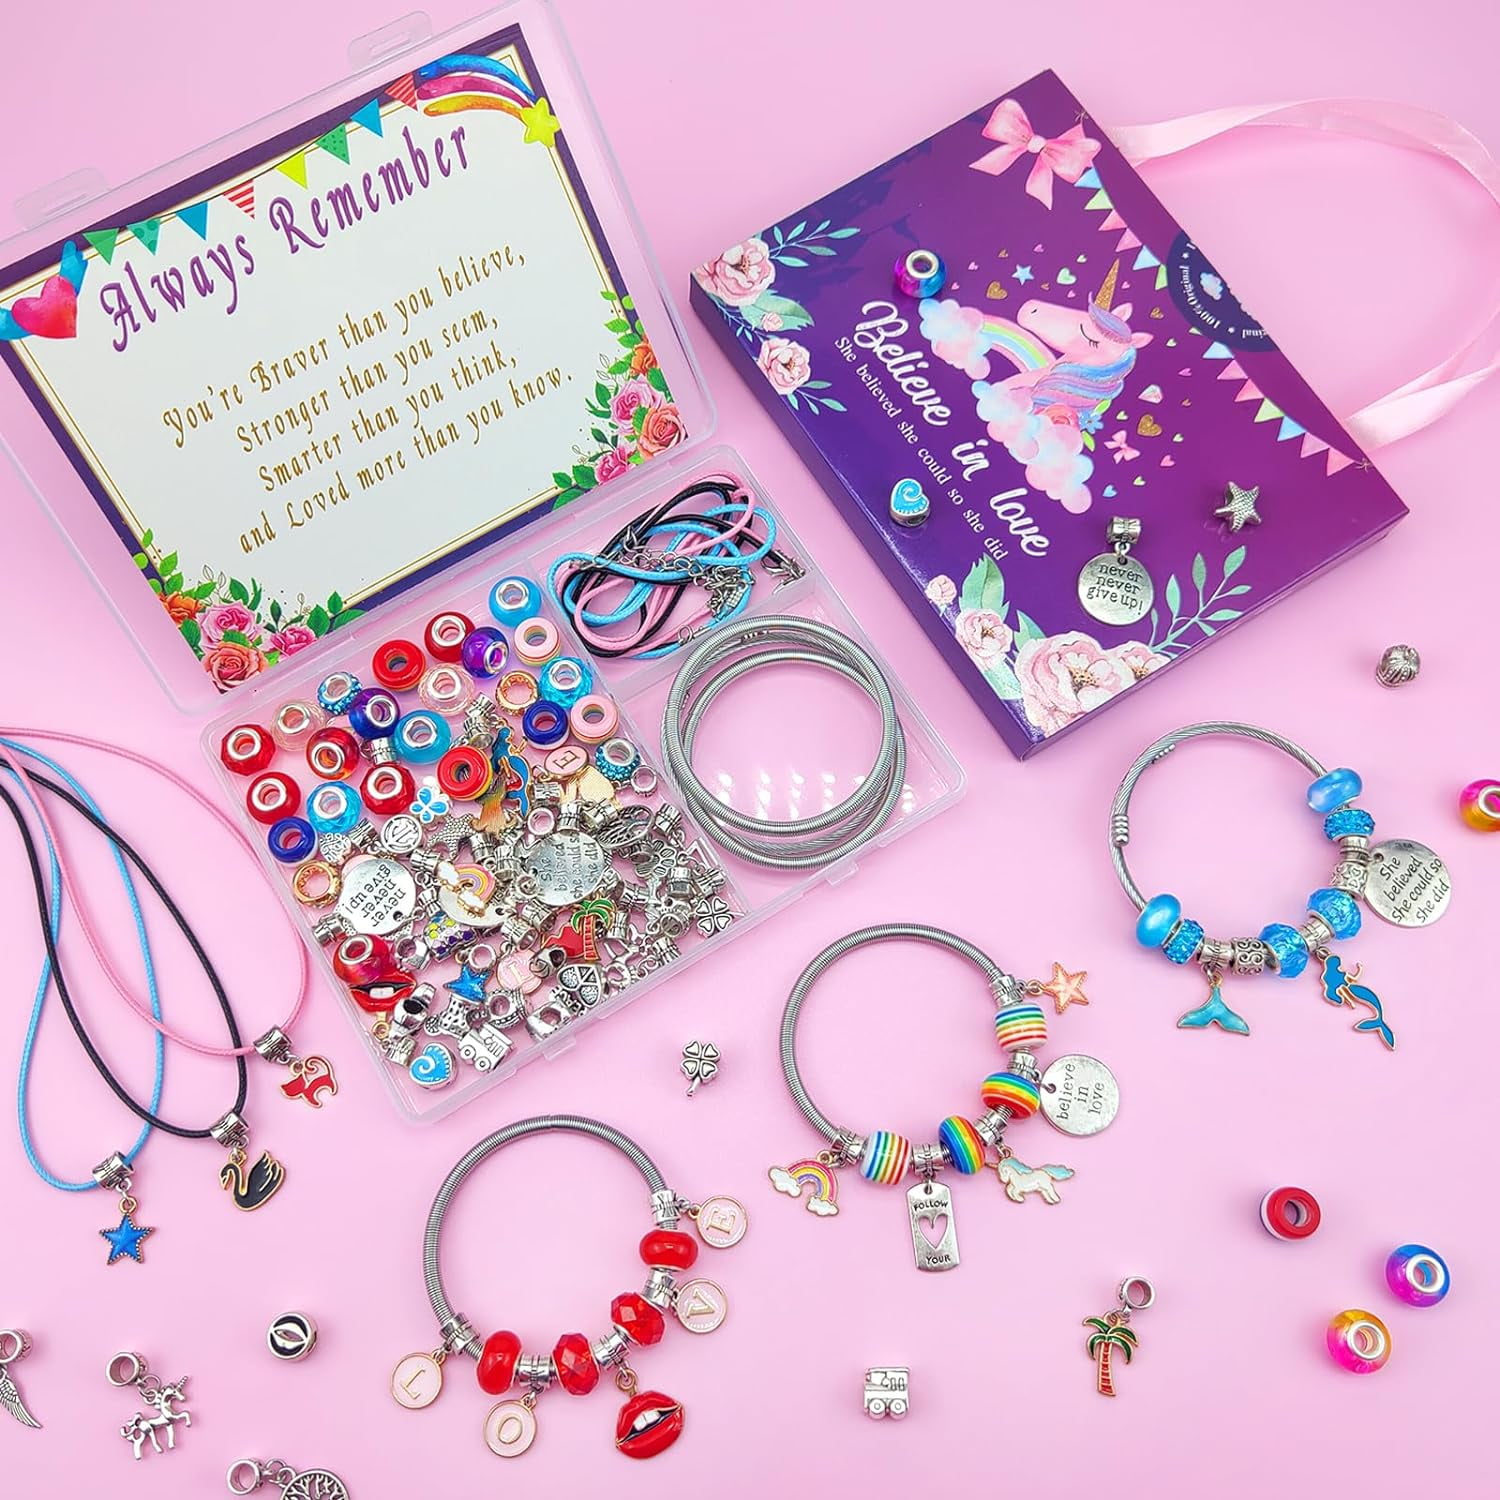  ZQFTZQ DIY Charm Bracelet Making Kit Unicorn/Mermaid Girl Toy, Jewelry Making Kit Including Jewelry Beads,Snake Chains,Bead Bracelet Kit,  Arts and Crafts for Kids Christmas Toys : Toys & Games